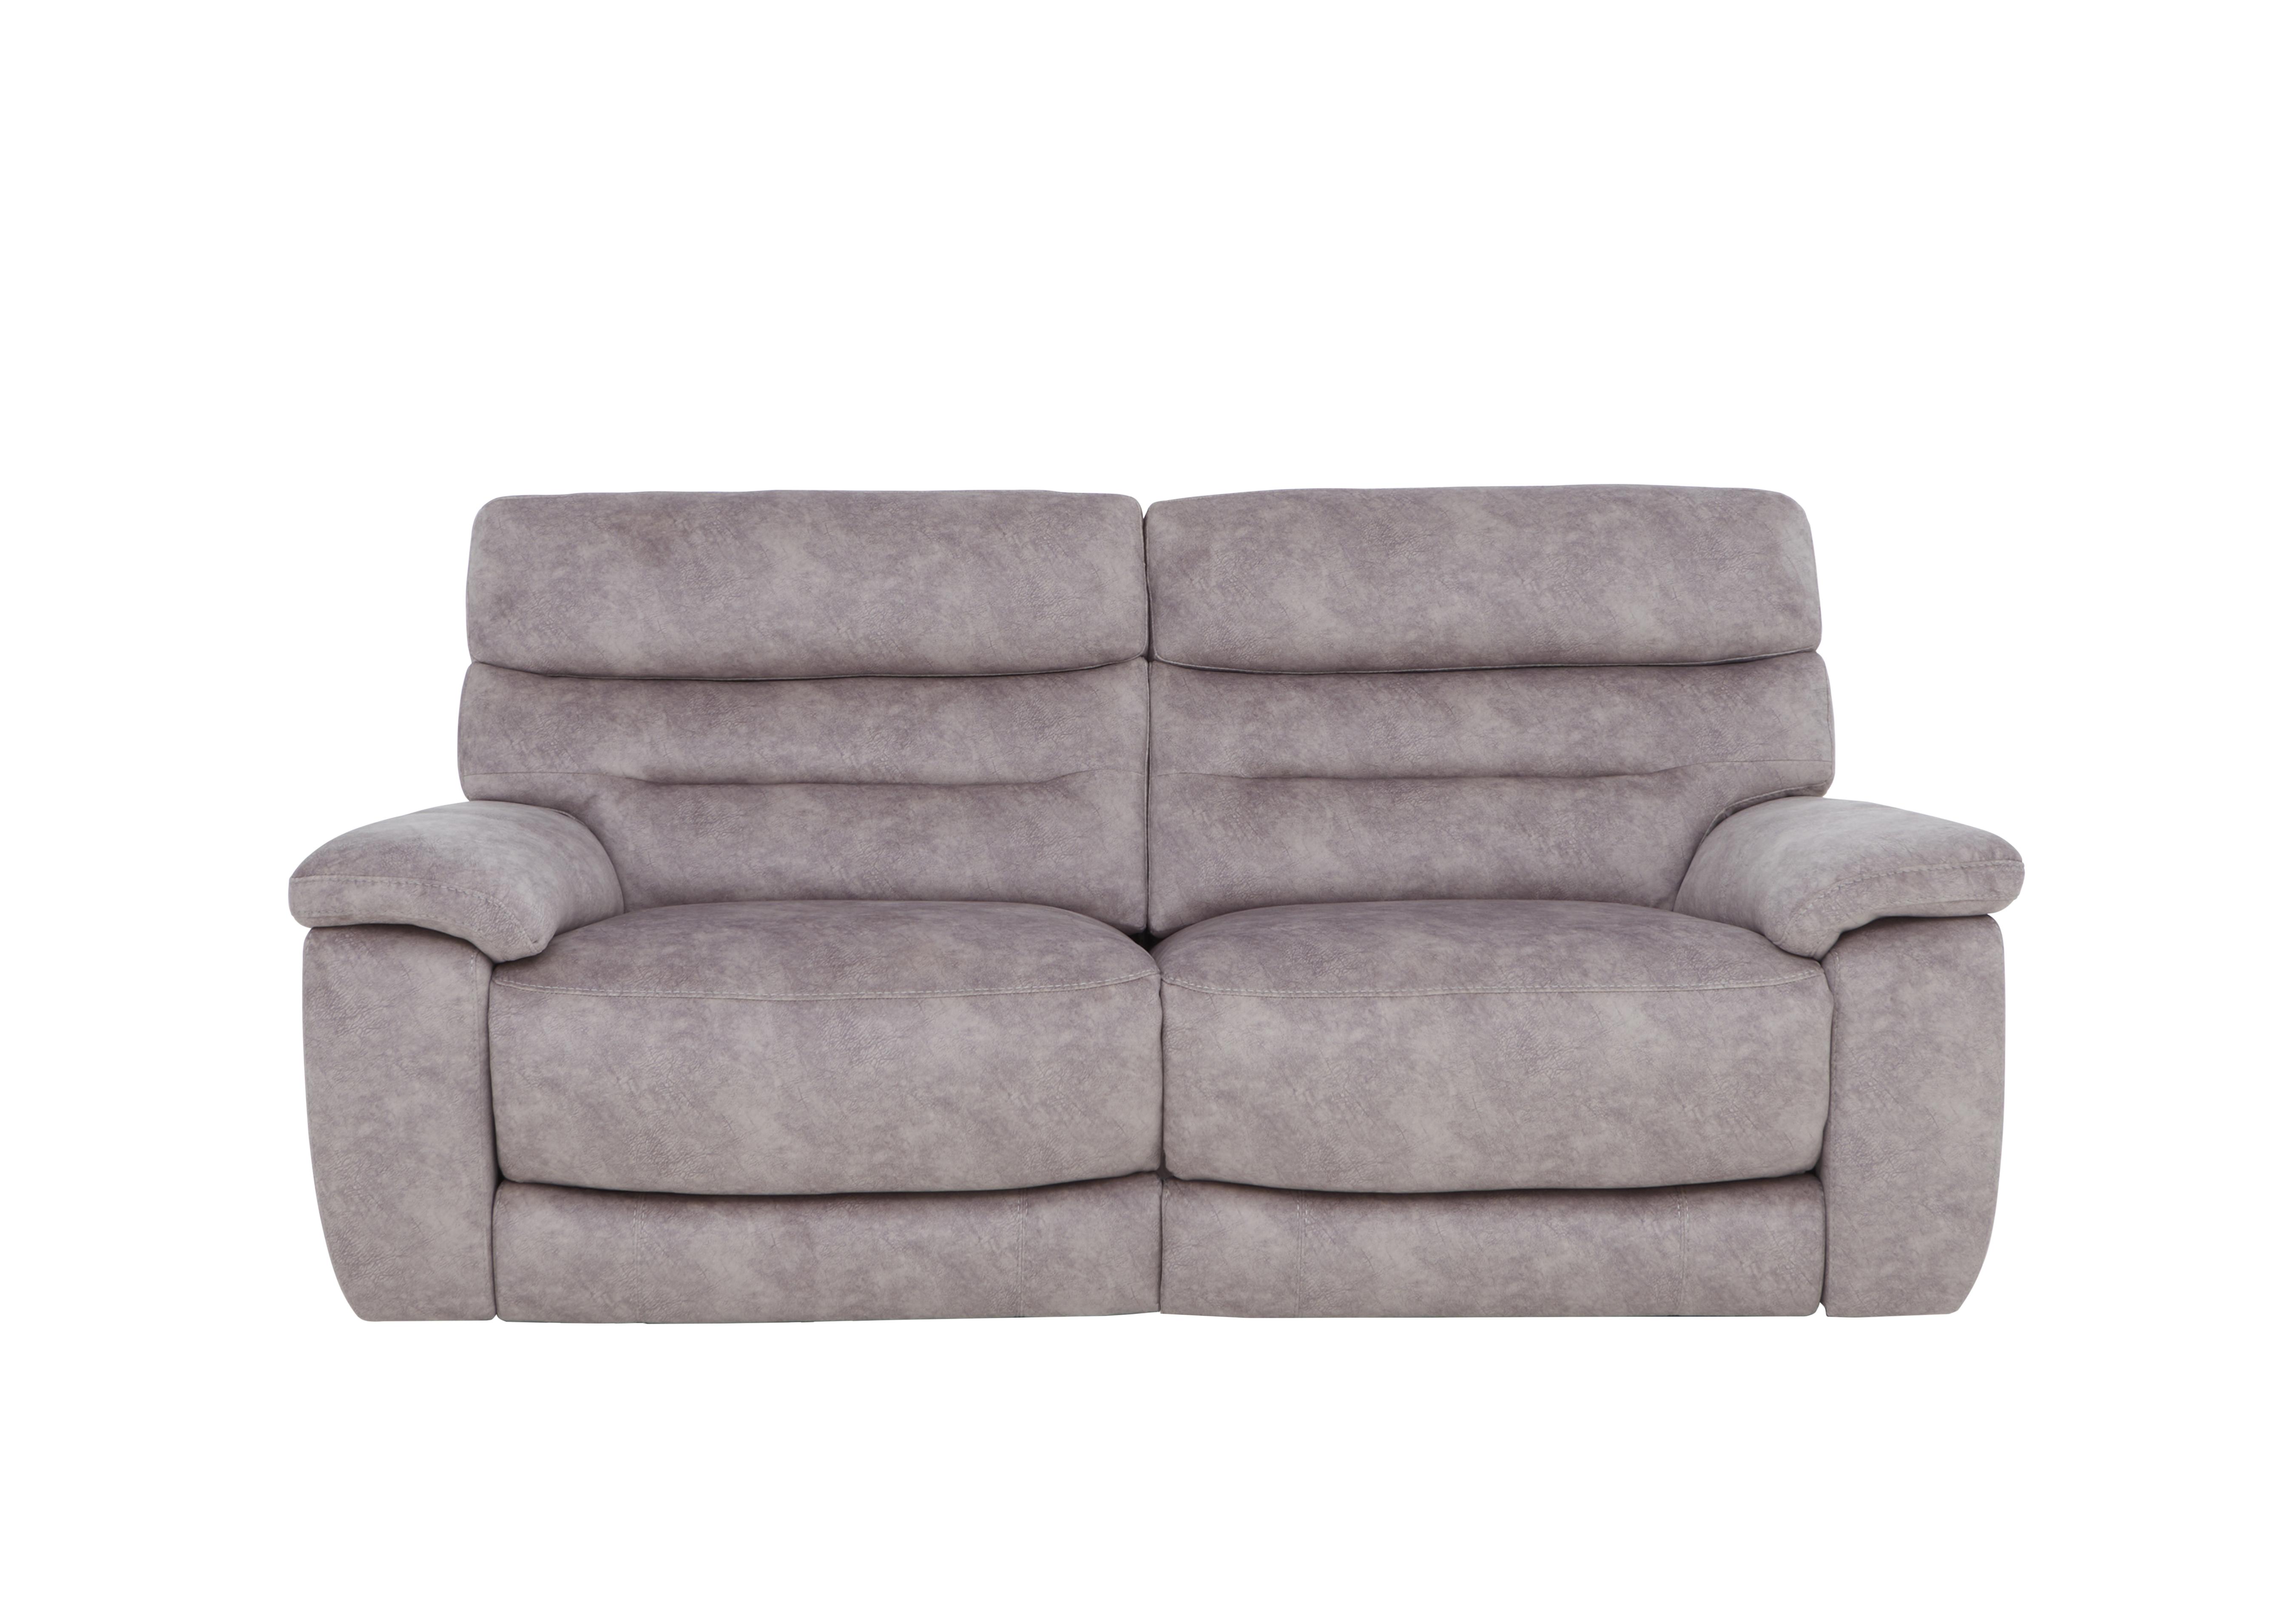 Nimbus 3 Seater Fabric Power Recliner Sofa with Power Headrests and Power Lumbar in Bfa-Bnn-R28 Grey on Furniture Village